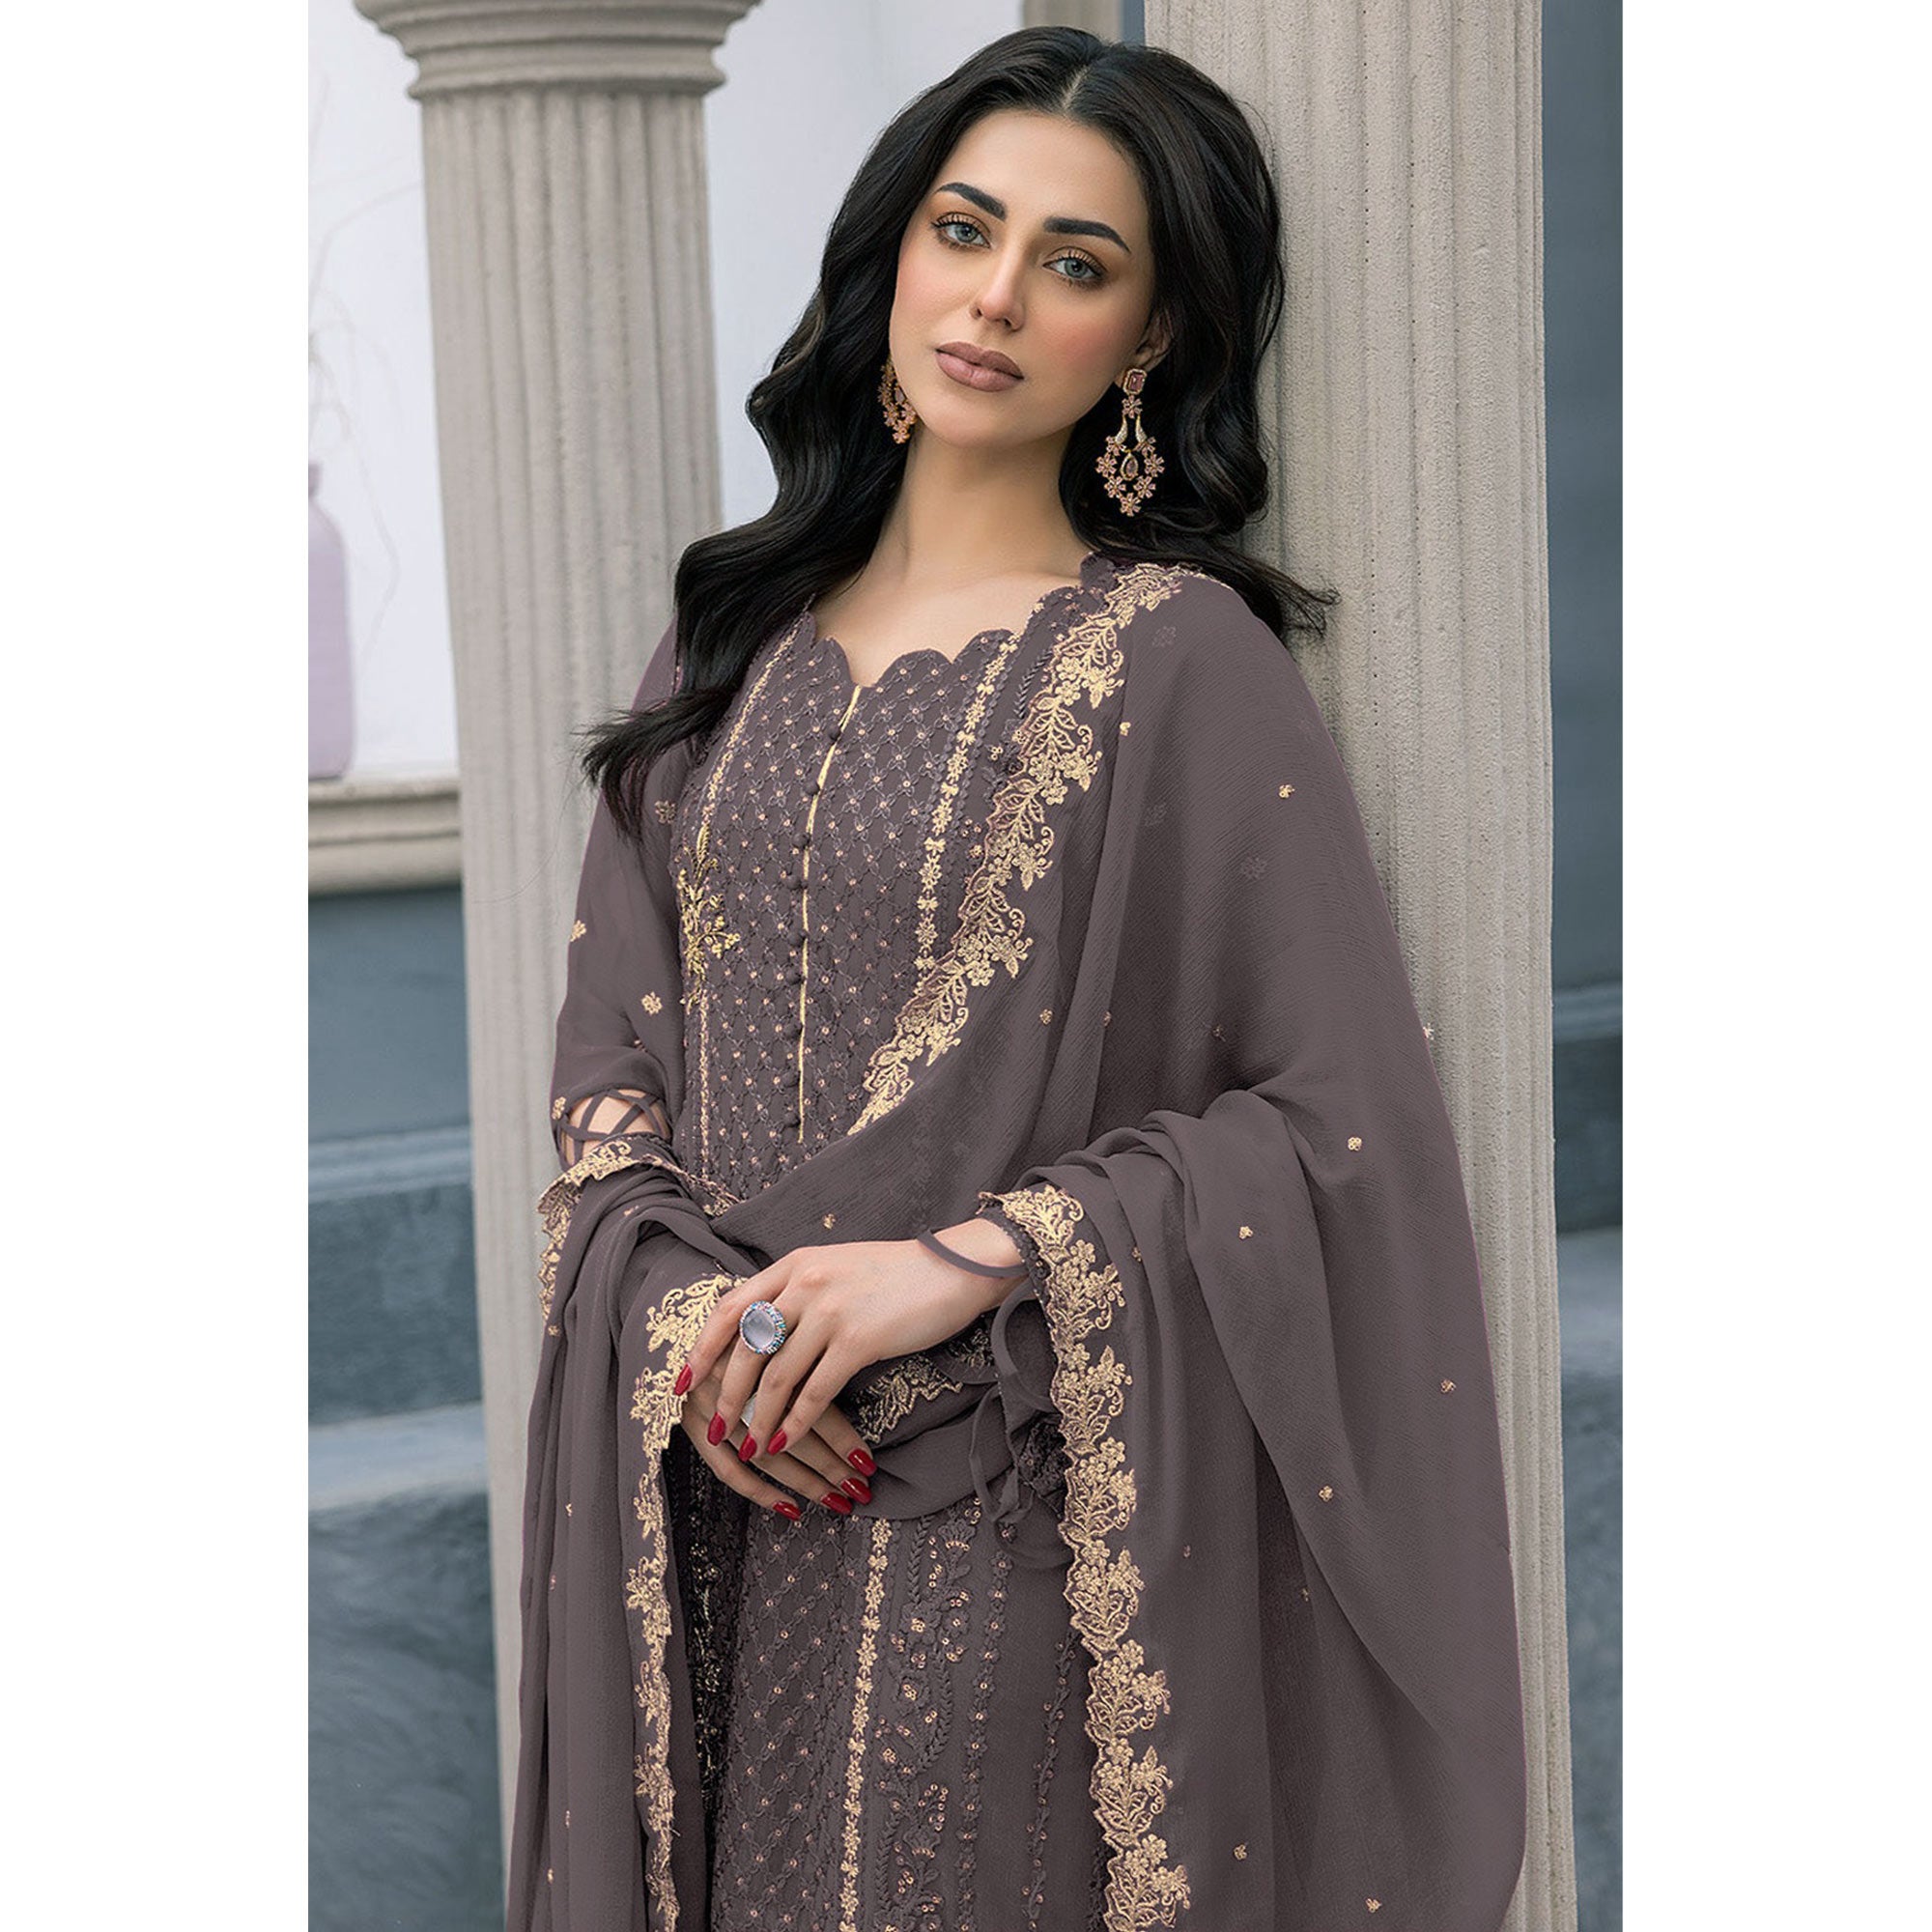 Brownish Mauve Floral Embroidered Georgette Semi Stitched Pakistani Suit